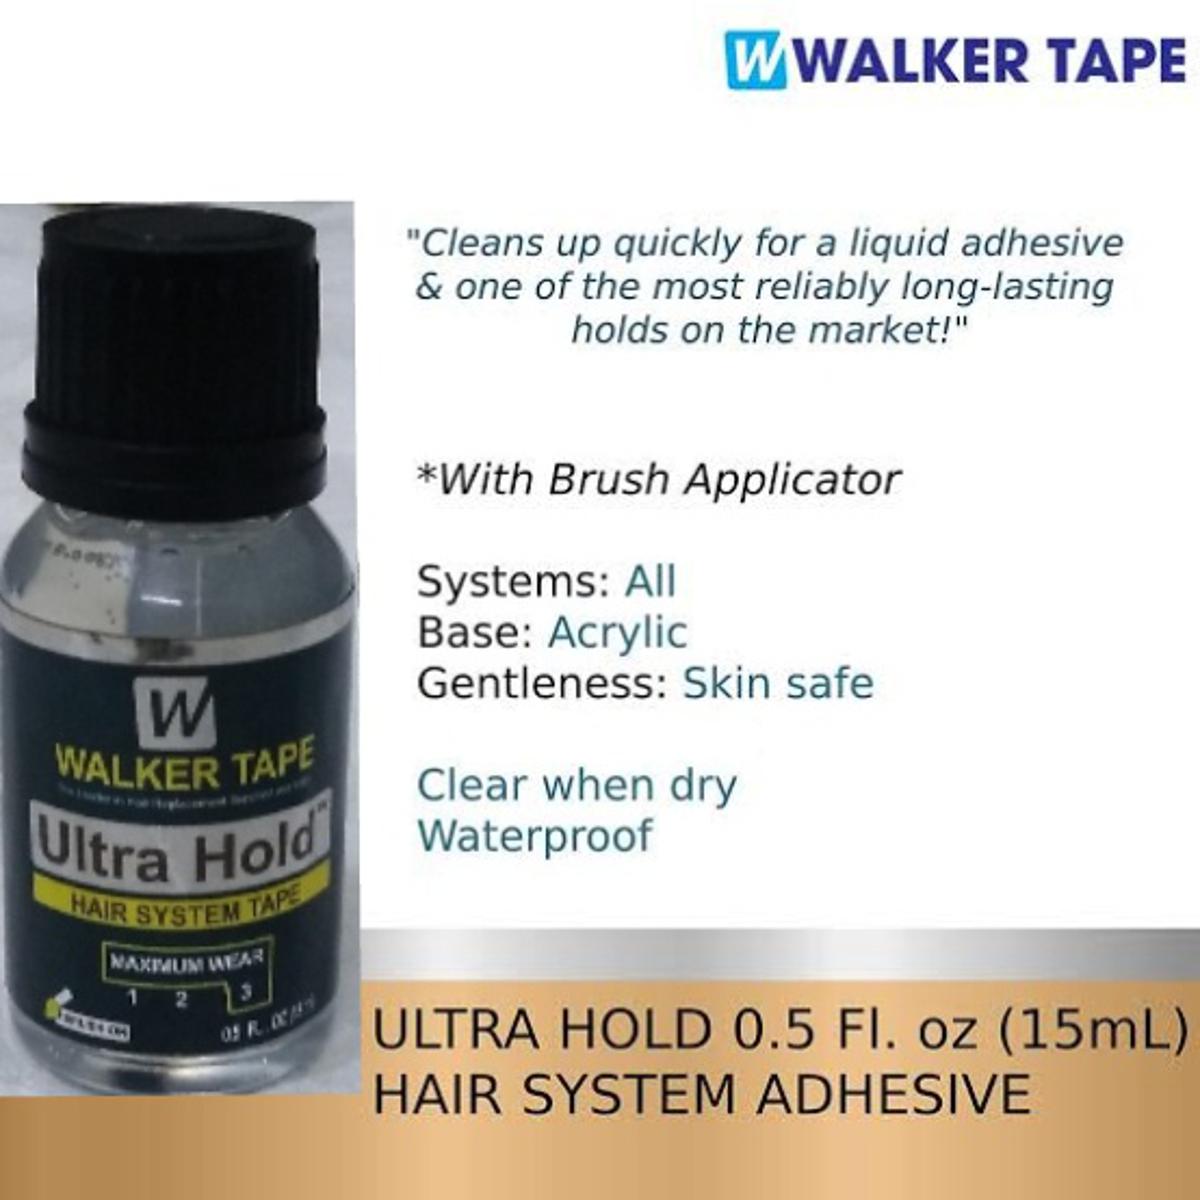 Walker Ultra Hold Glue - Hair System Adhesive Price in Pakistan